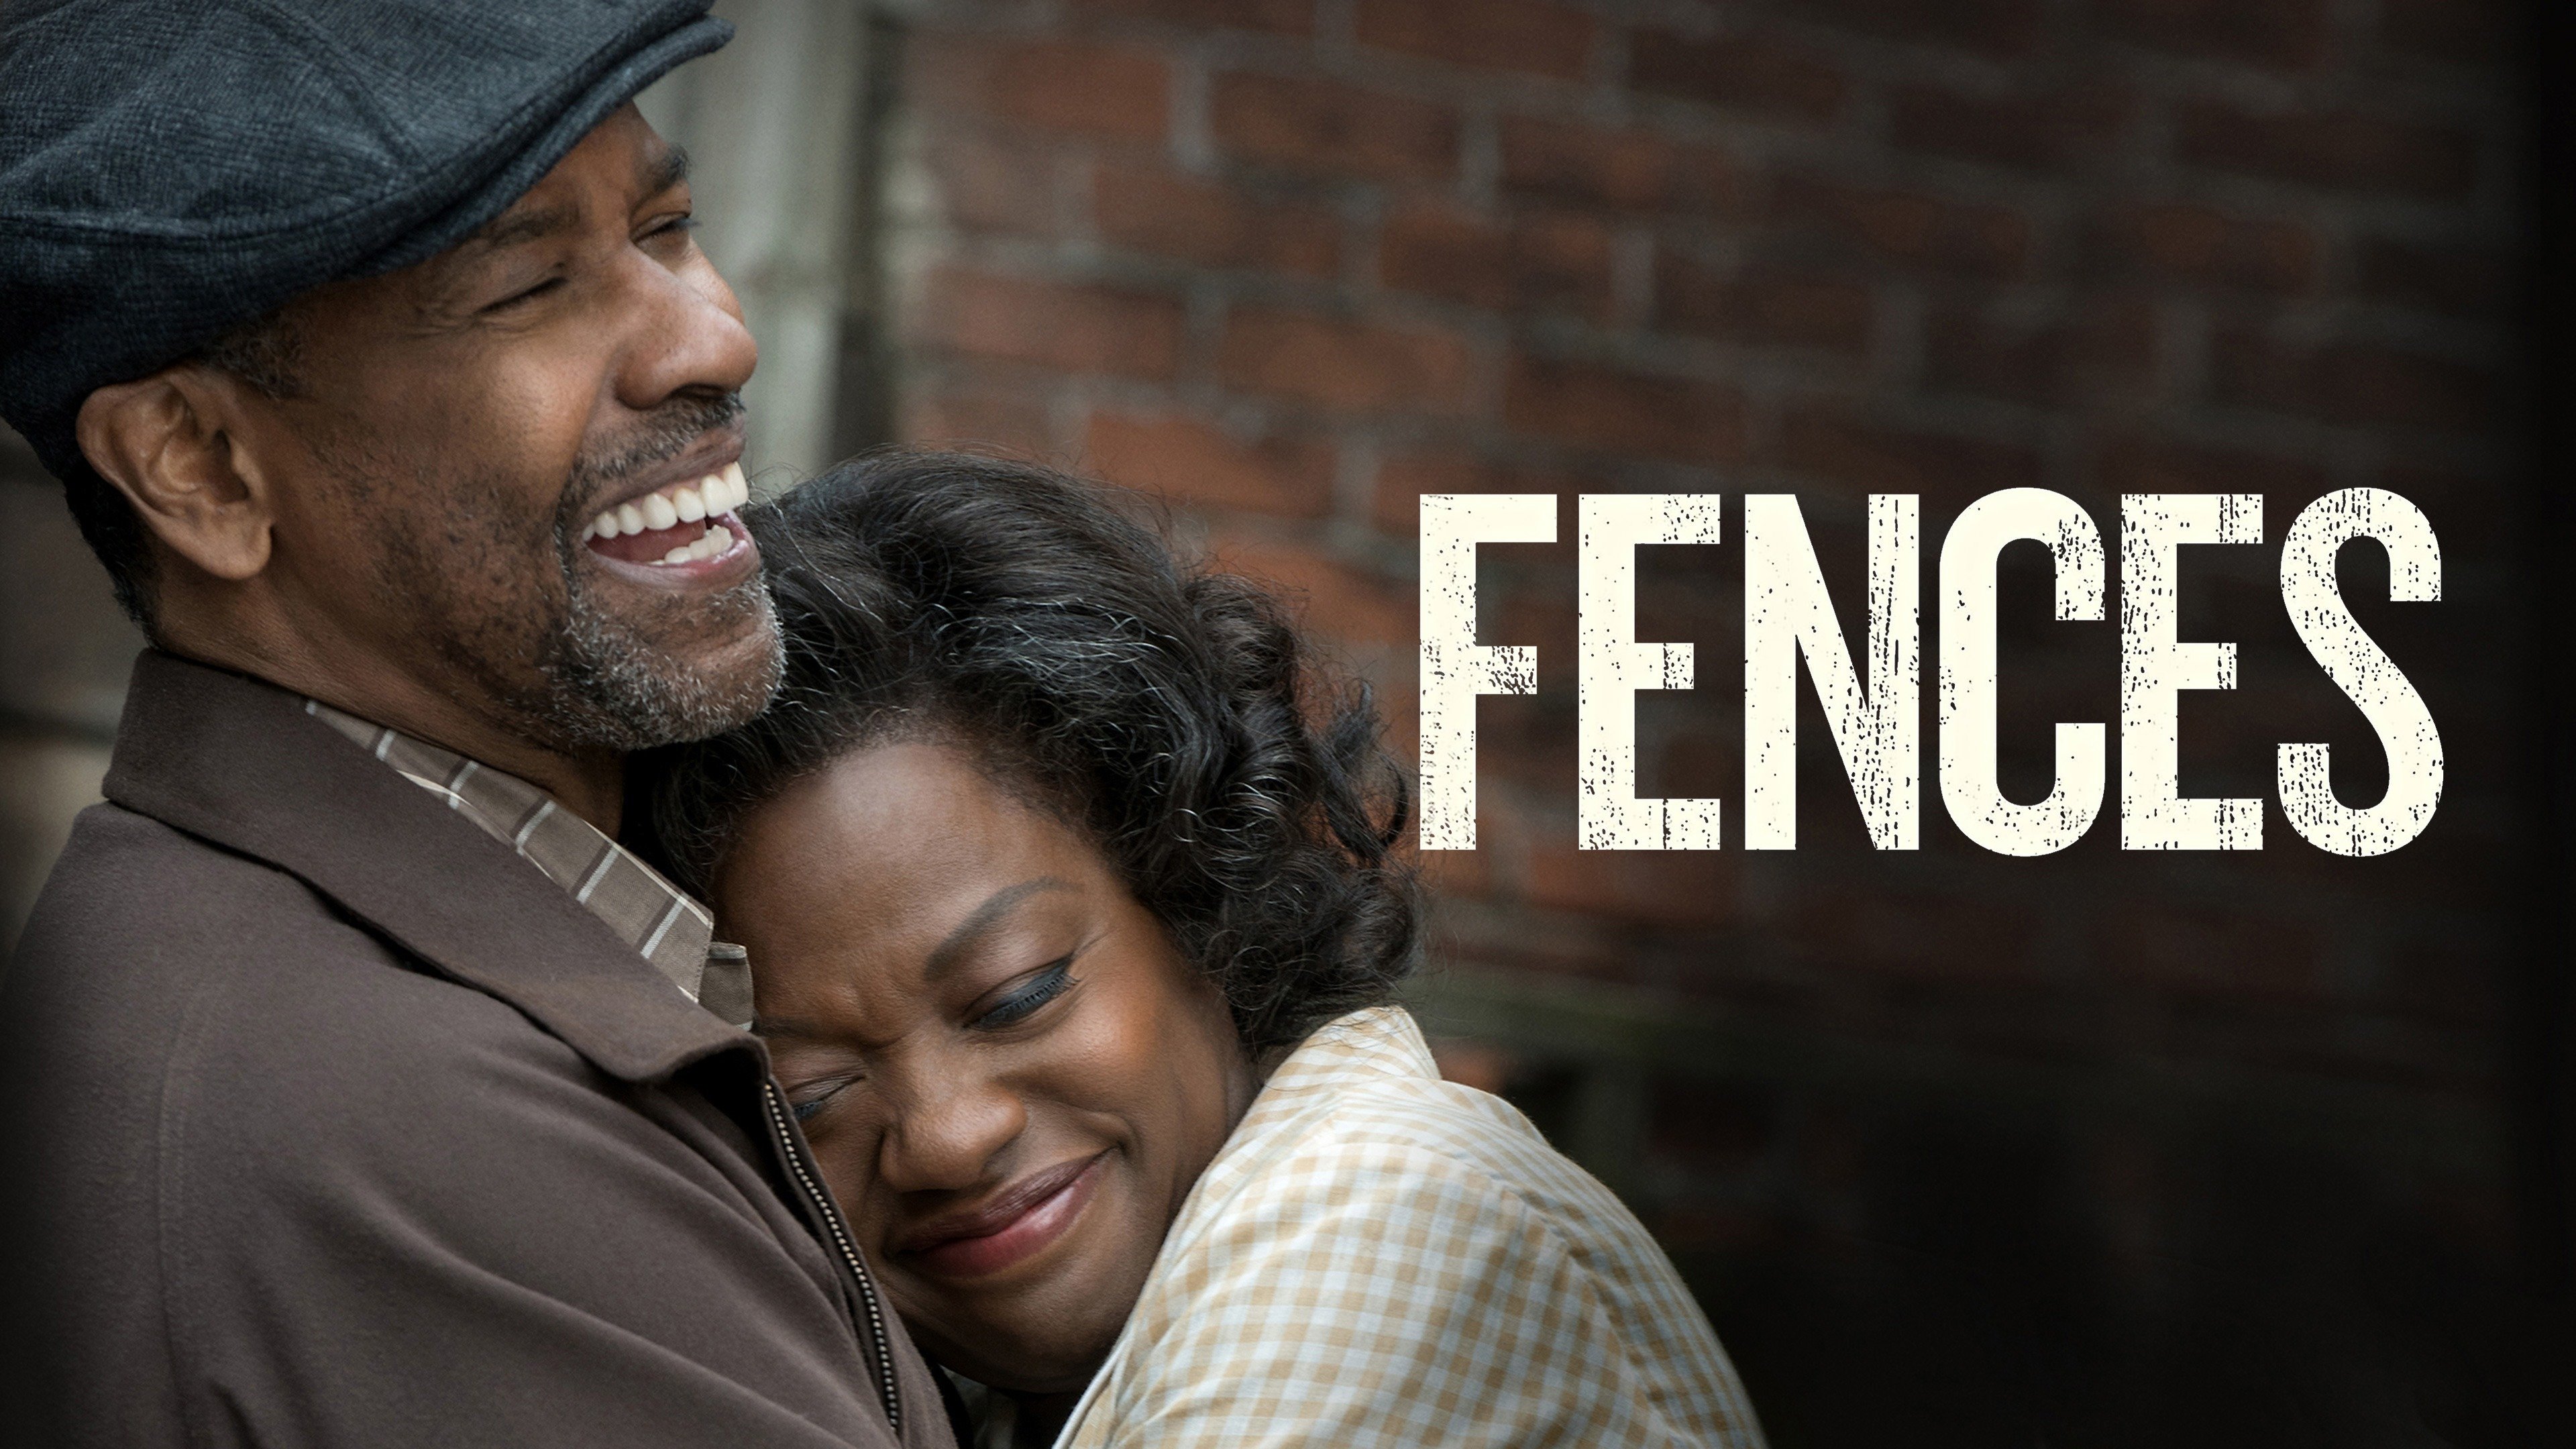 Fences movie EXCLUSIVE clip: Watch Denzel Washington in acclaimed role |  Films | Entertainment | Express.co.uk